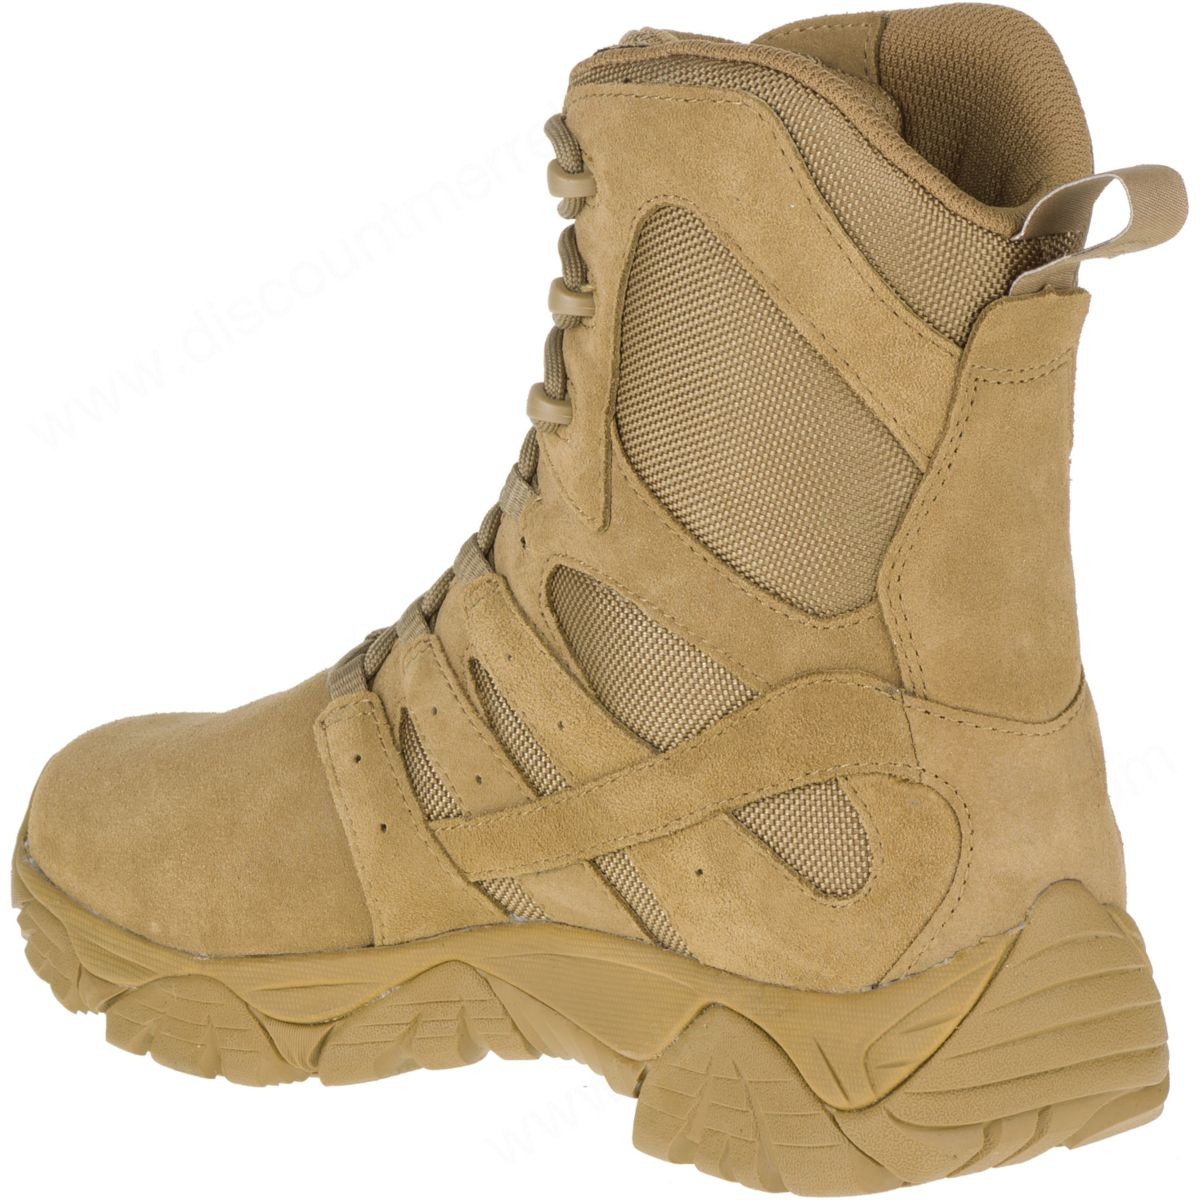 Merrell Lady's Moab " Tactical Defense Boot Coyote - -6